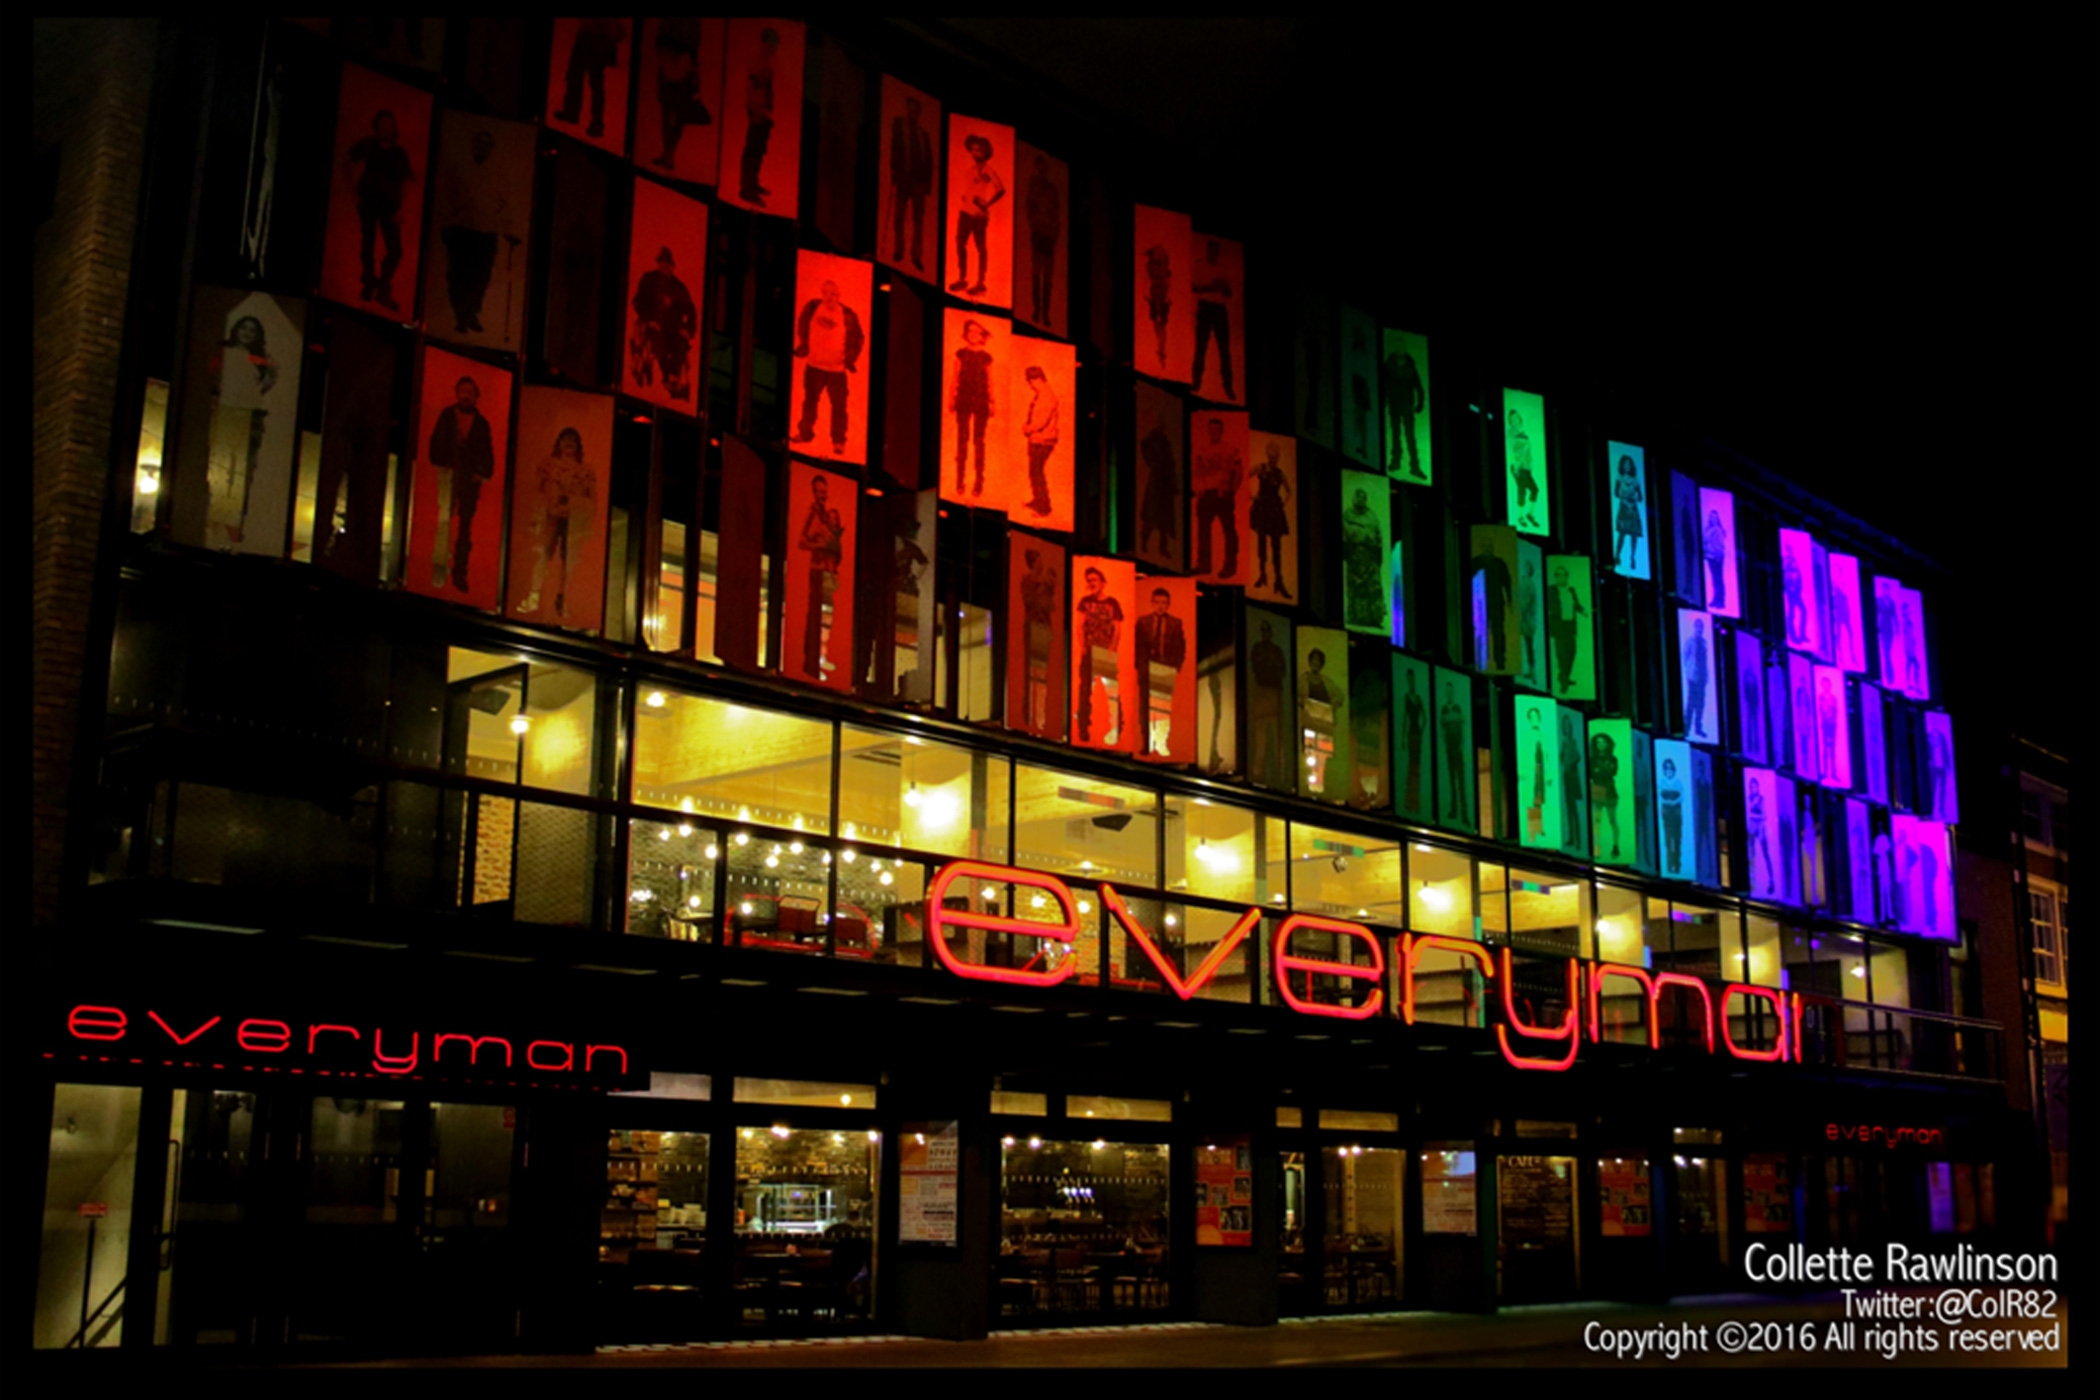 The Everyman theatre, lit up in rainbow colours for Liverpool Pride 2016